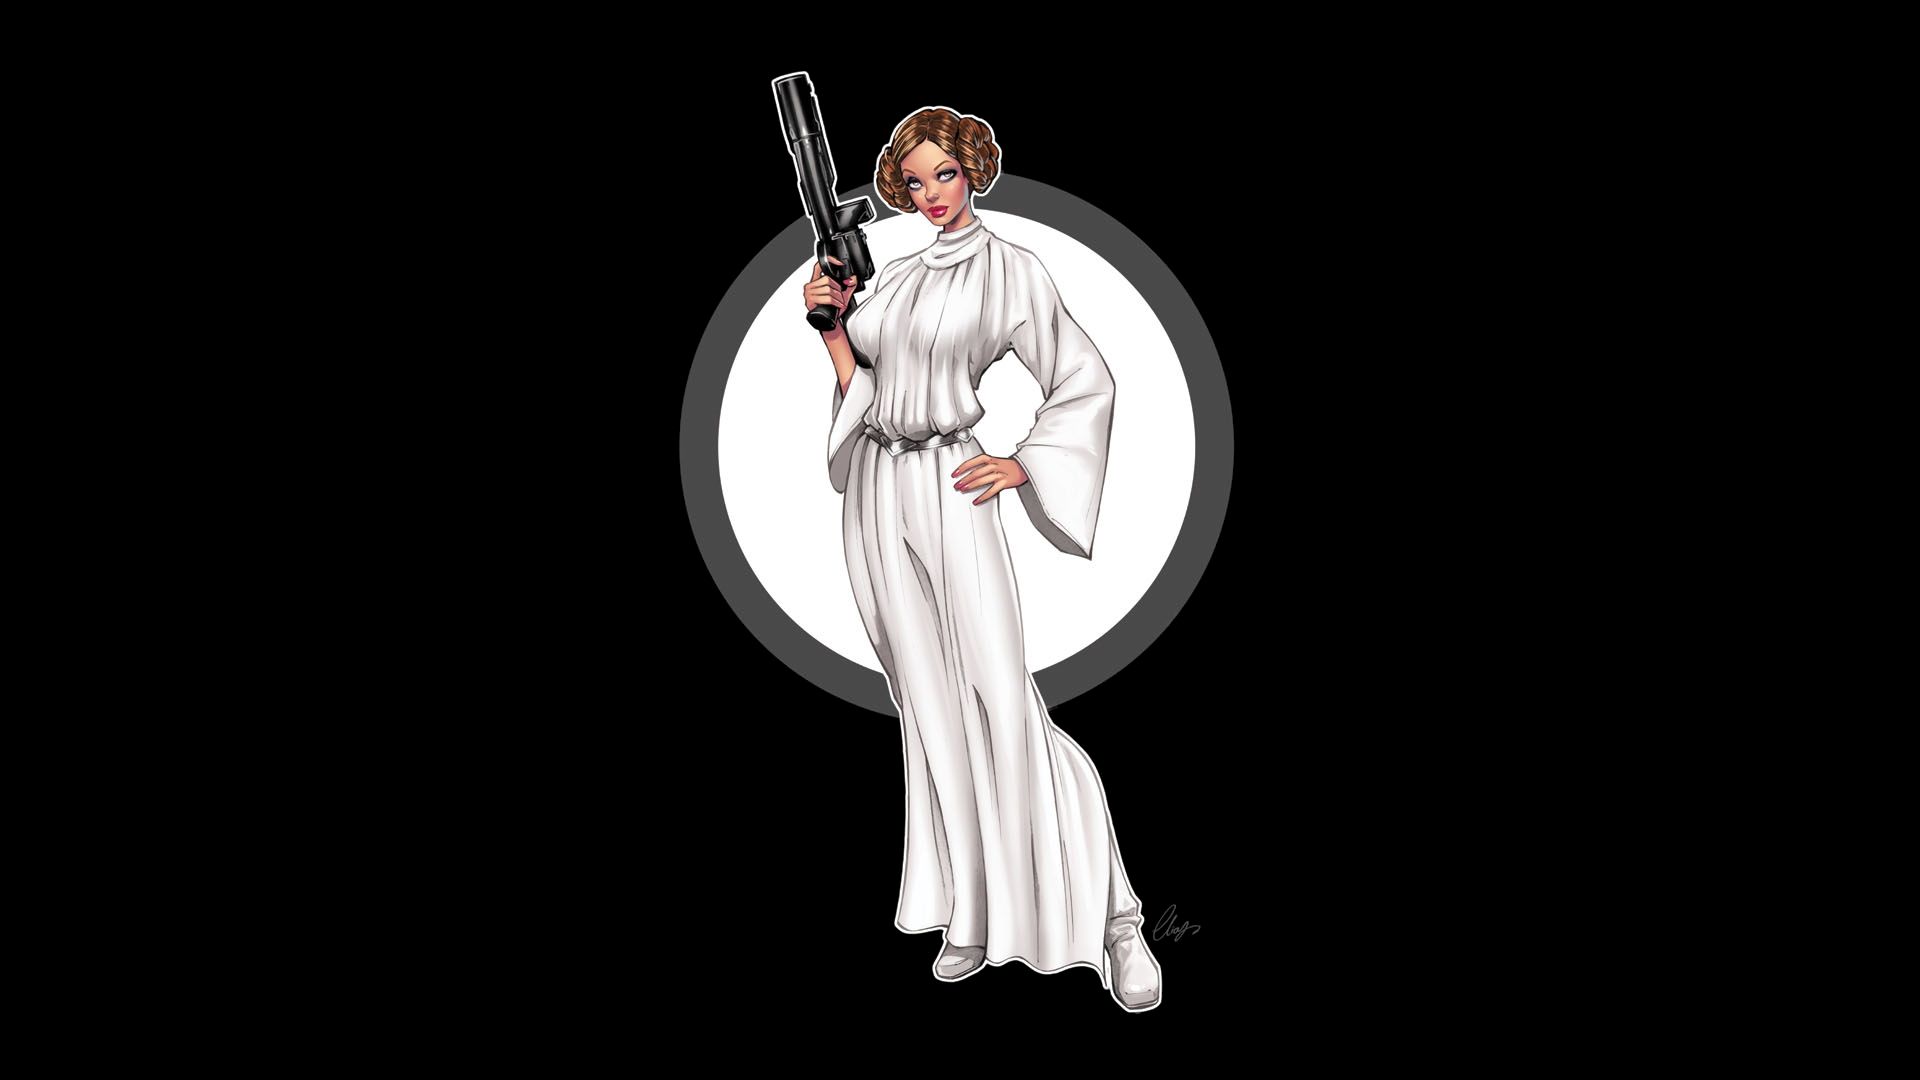 1920x1080 60+ Princess Leia HD Wallpapers and Backgrounds